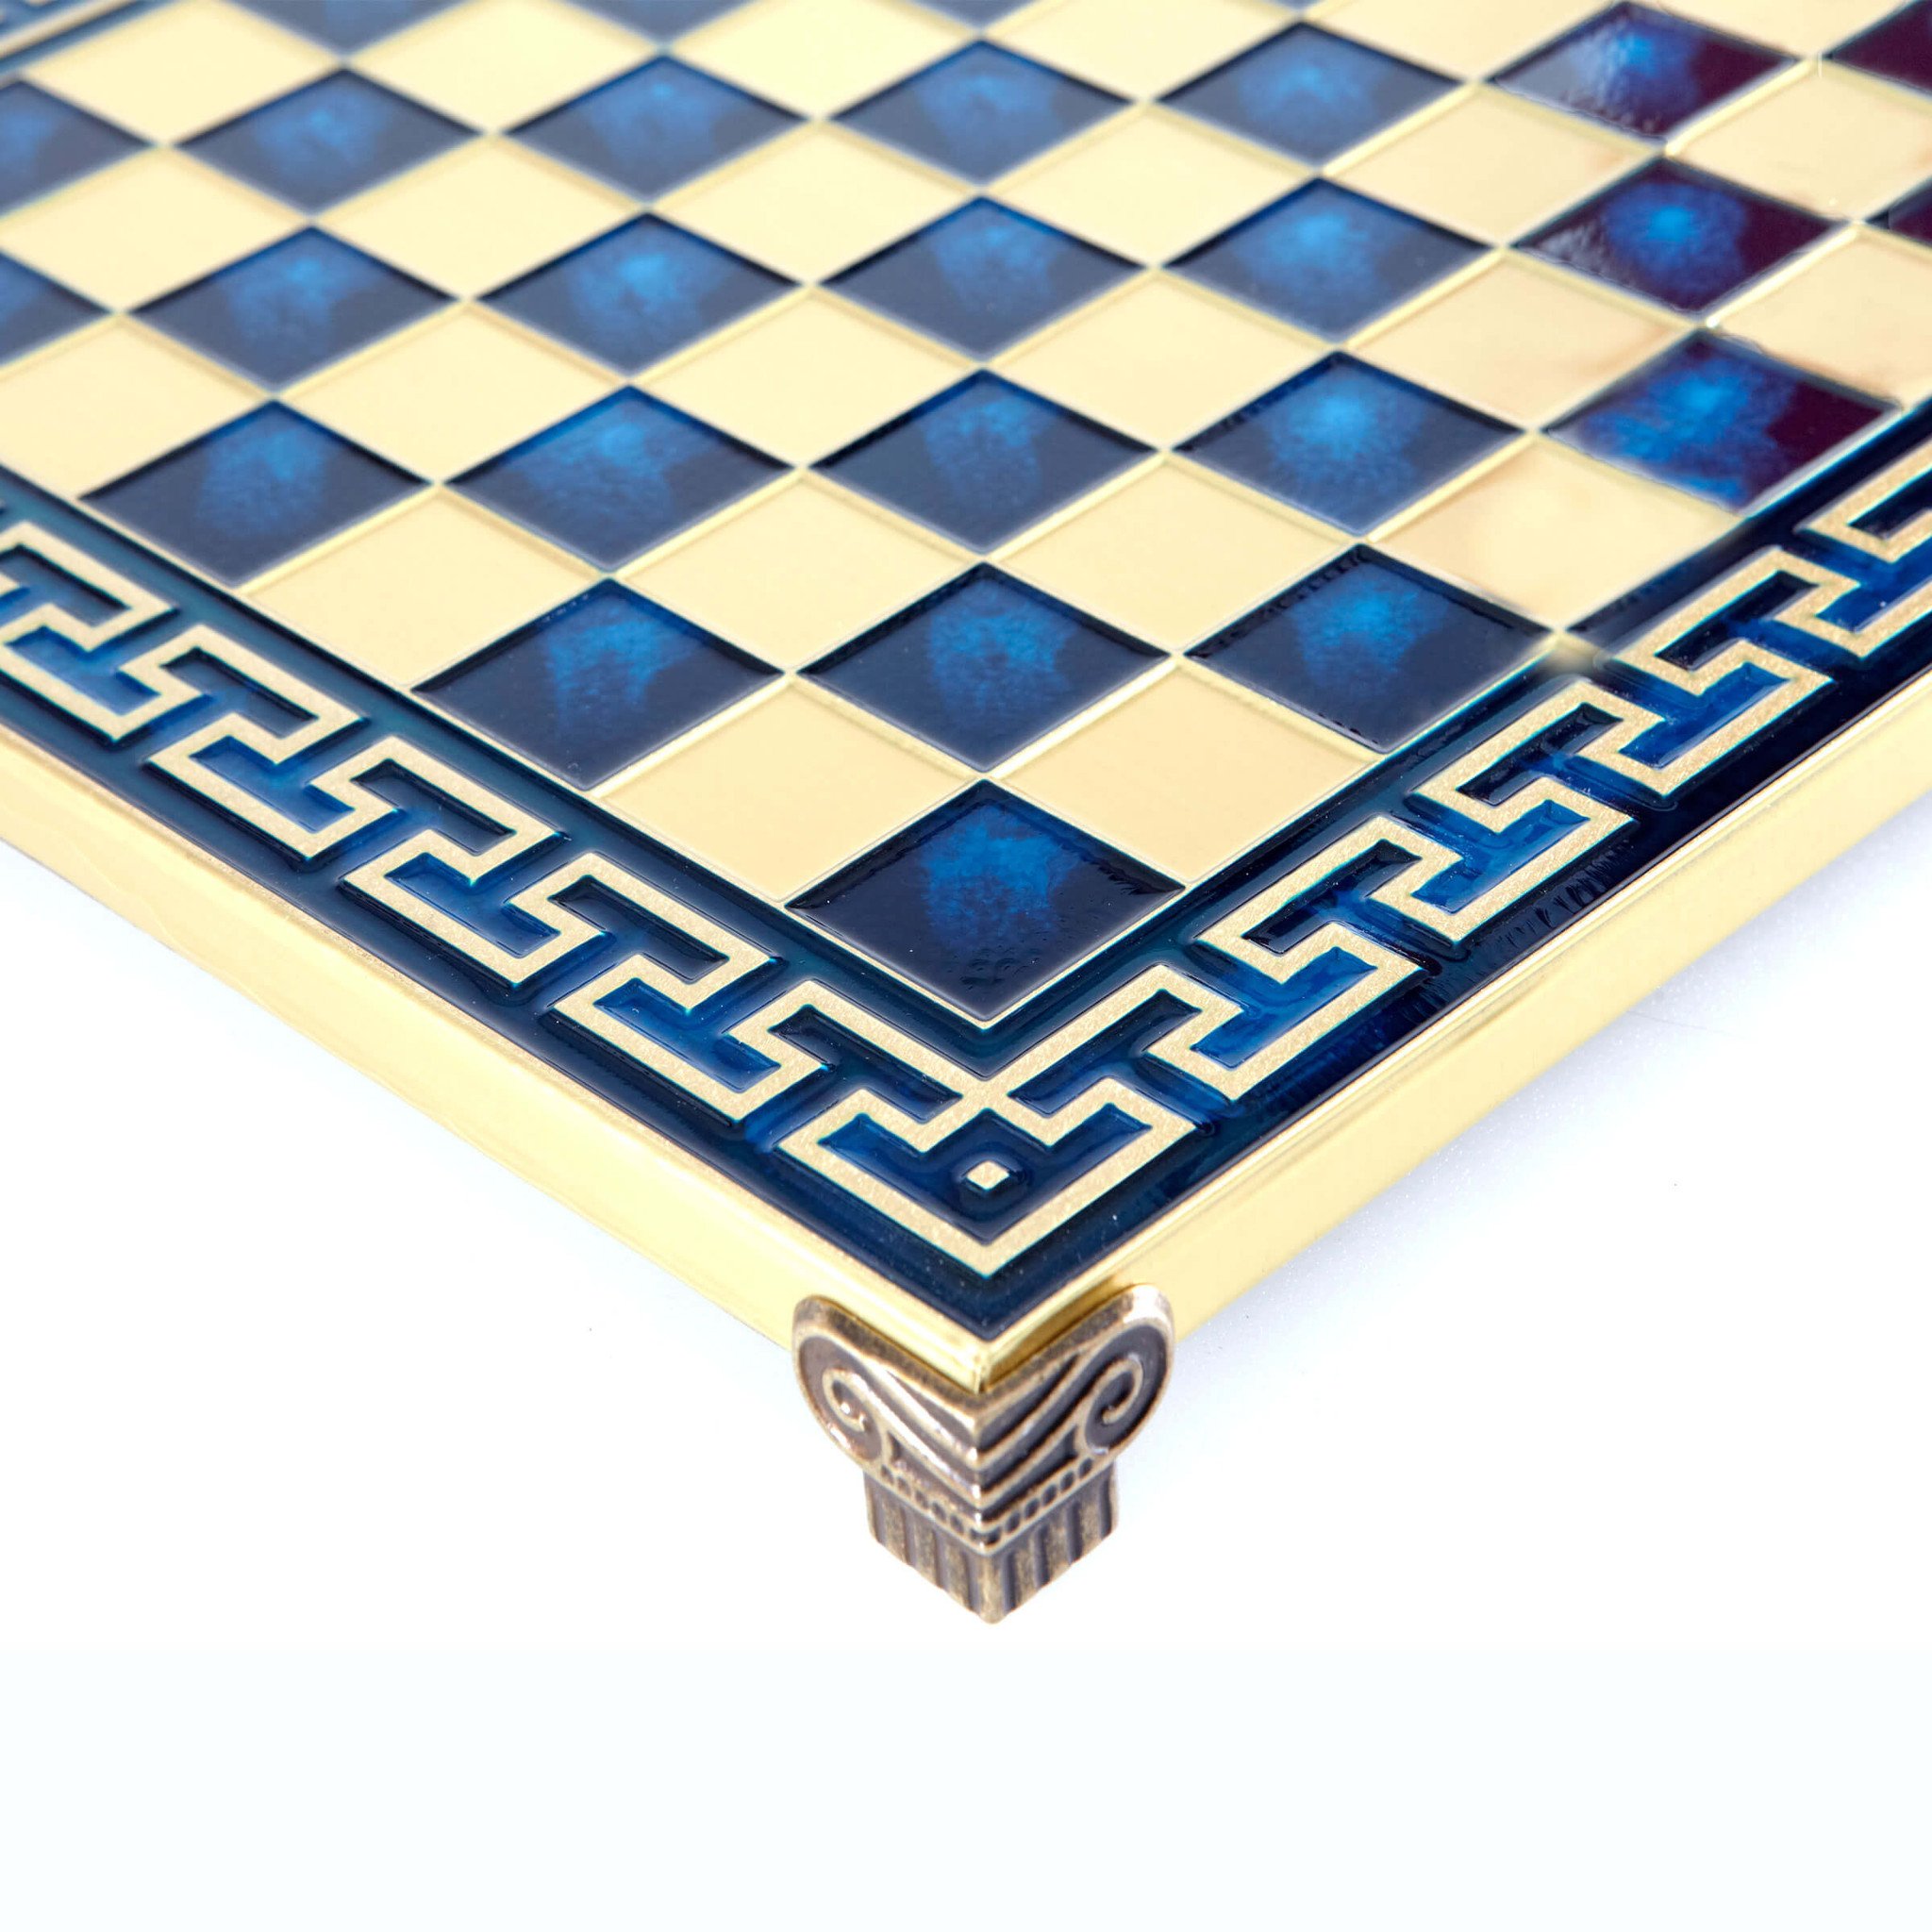 Meander Brass (Small) - Handcrafted Metallic Chess Board ...